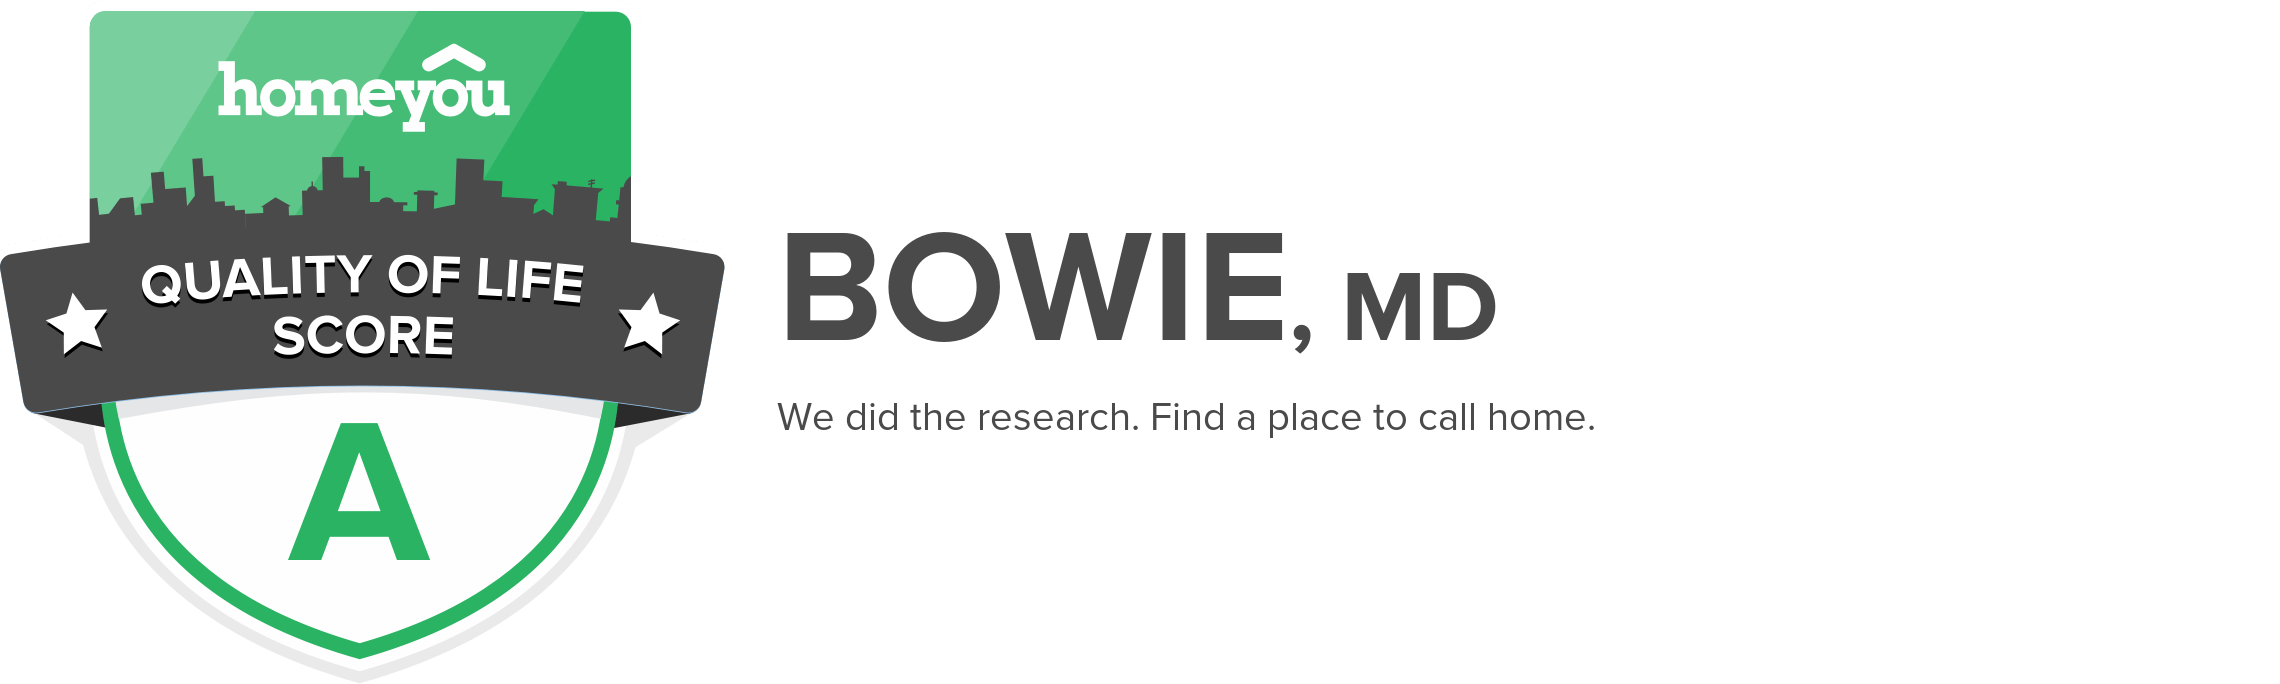 Bowie, MD